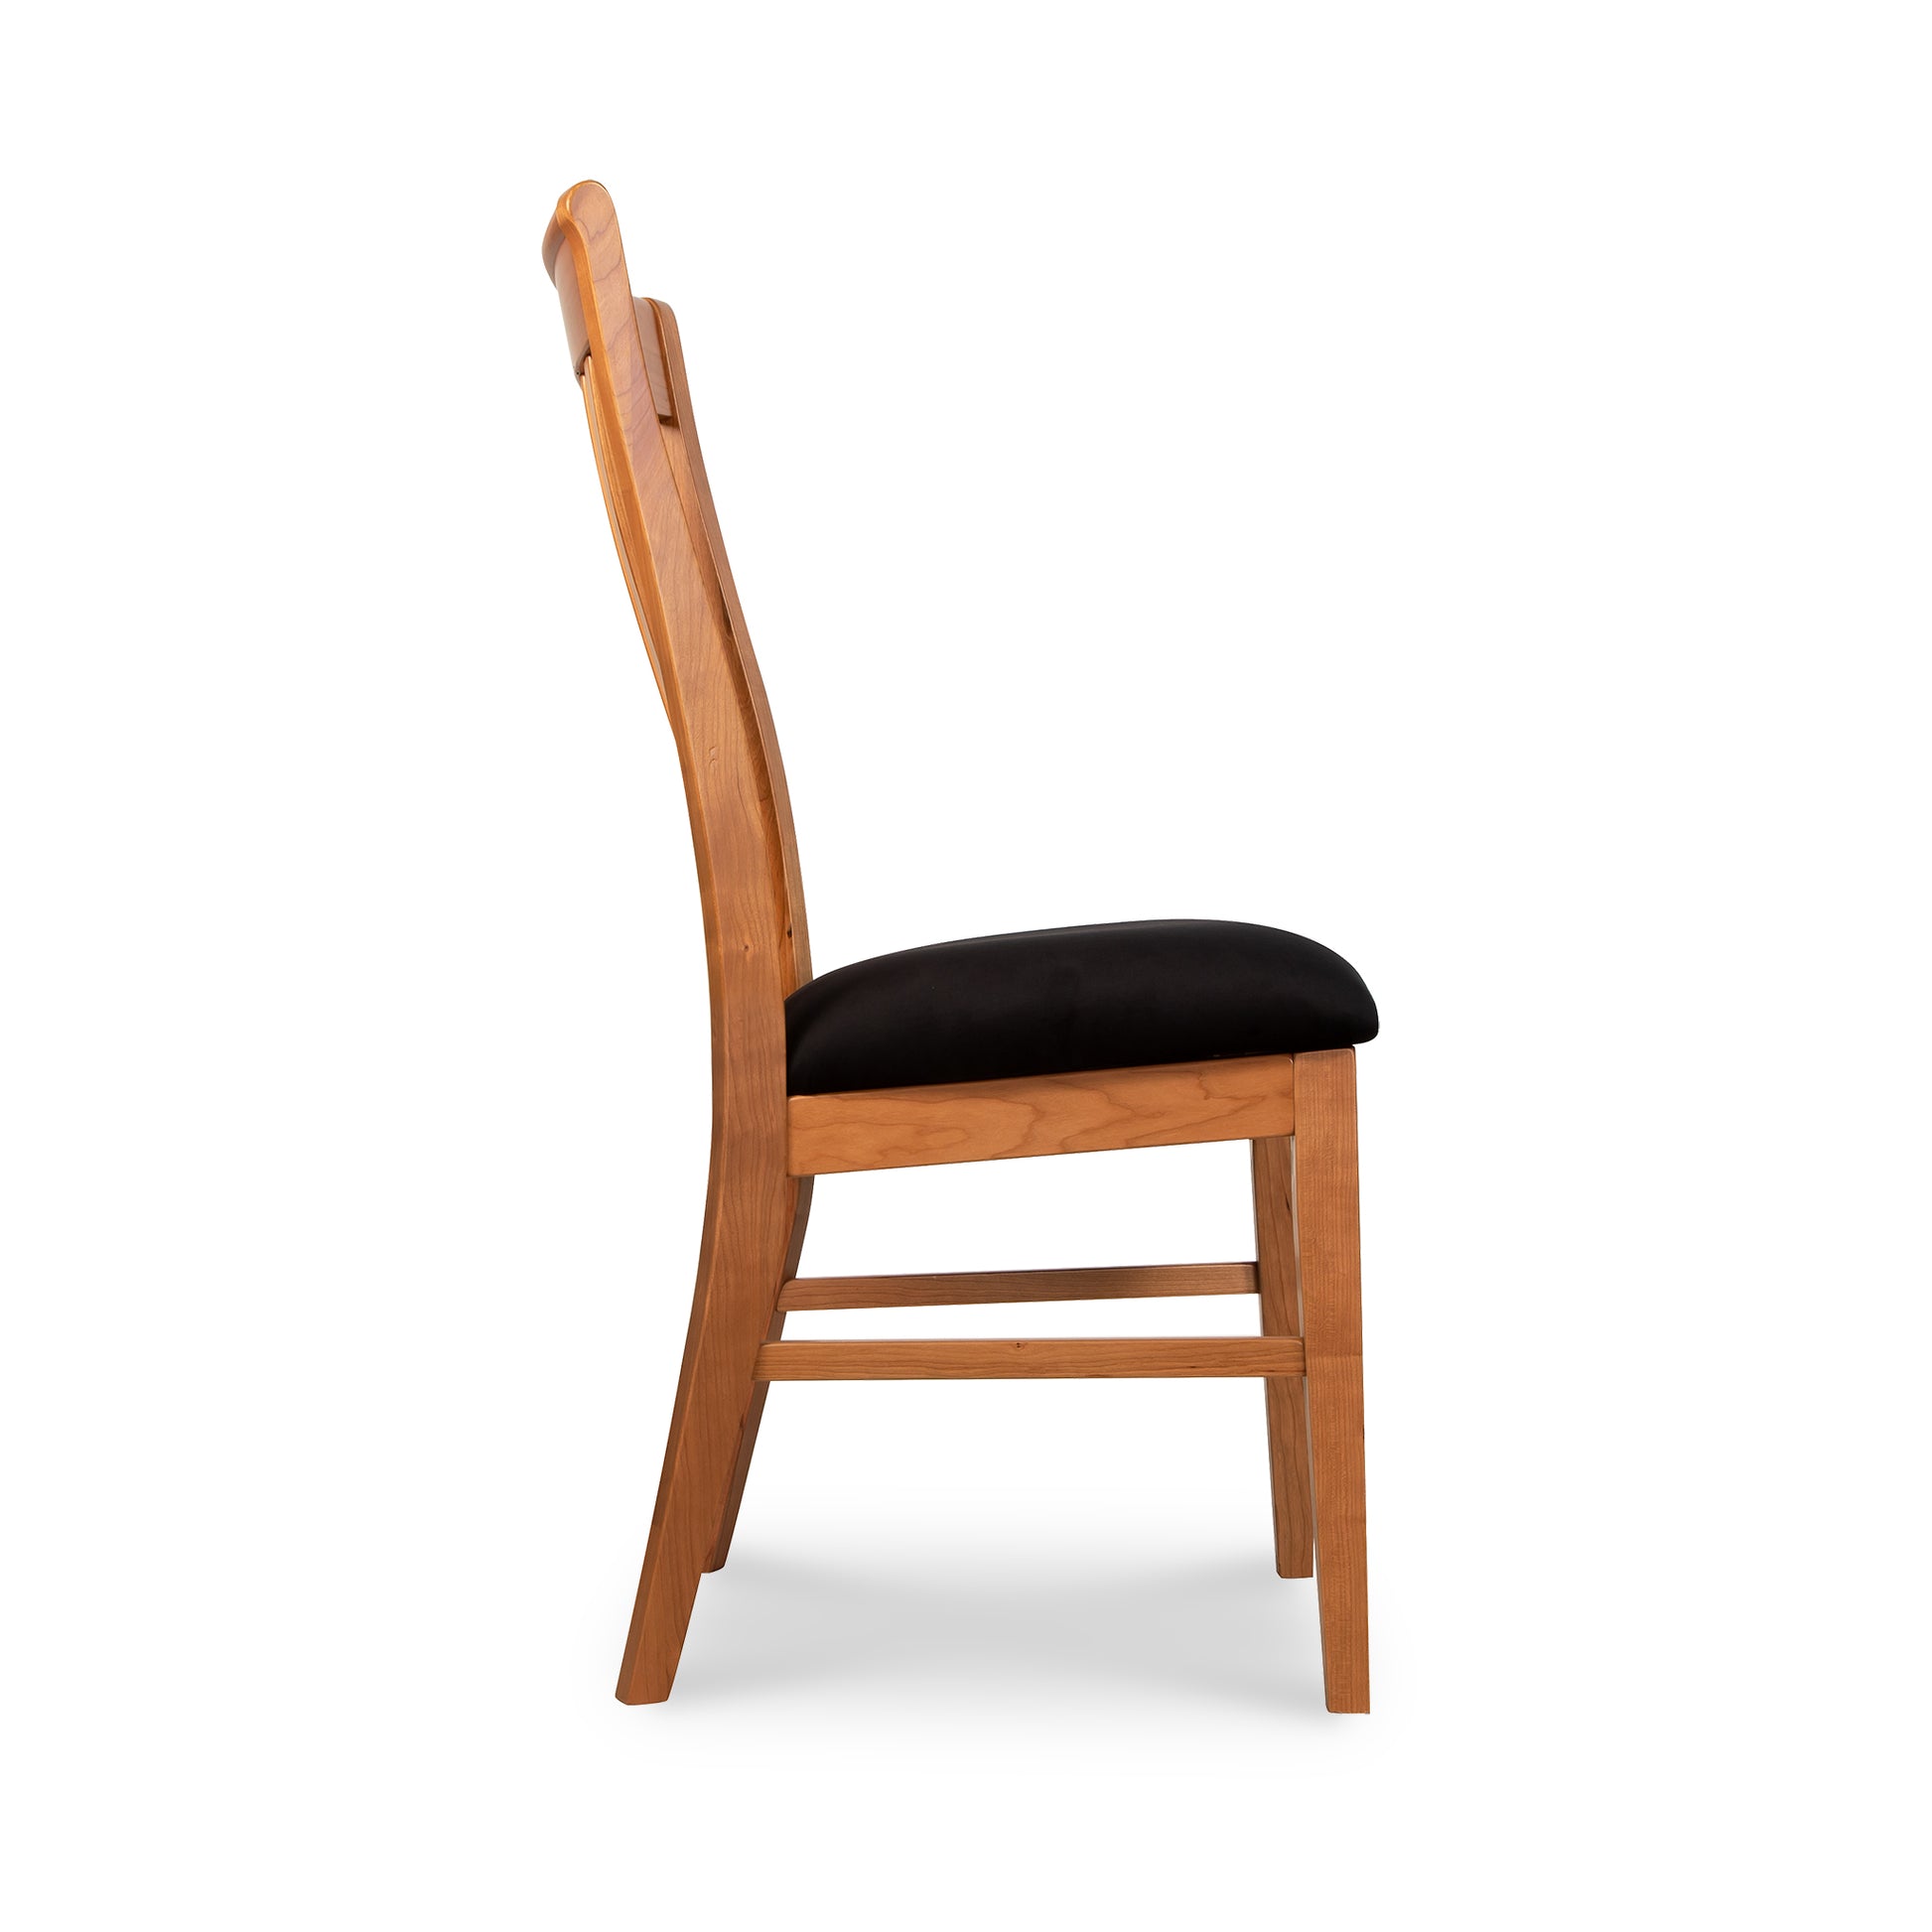 A wooden dining chair with black upholstered seat.